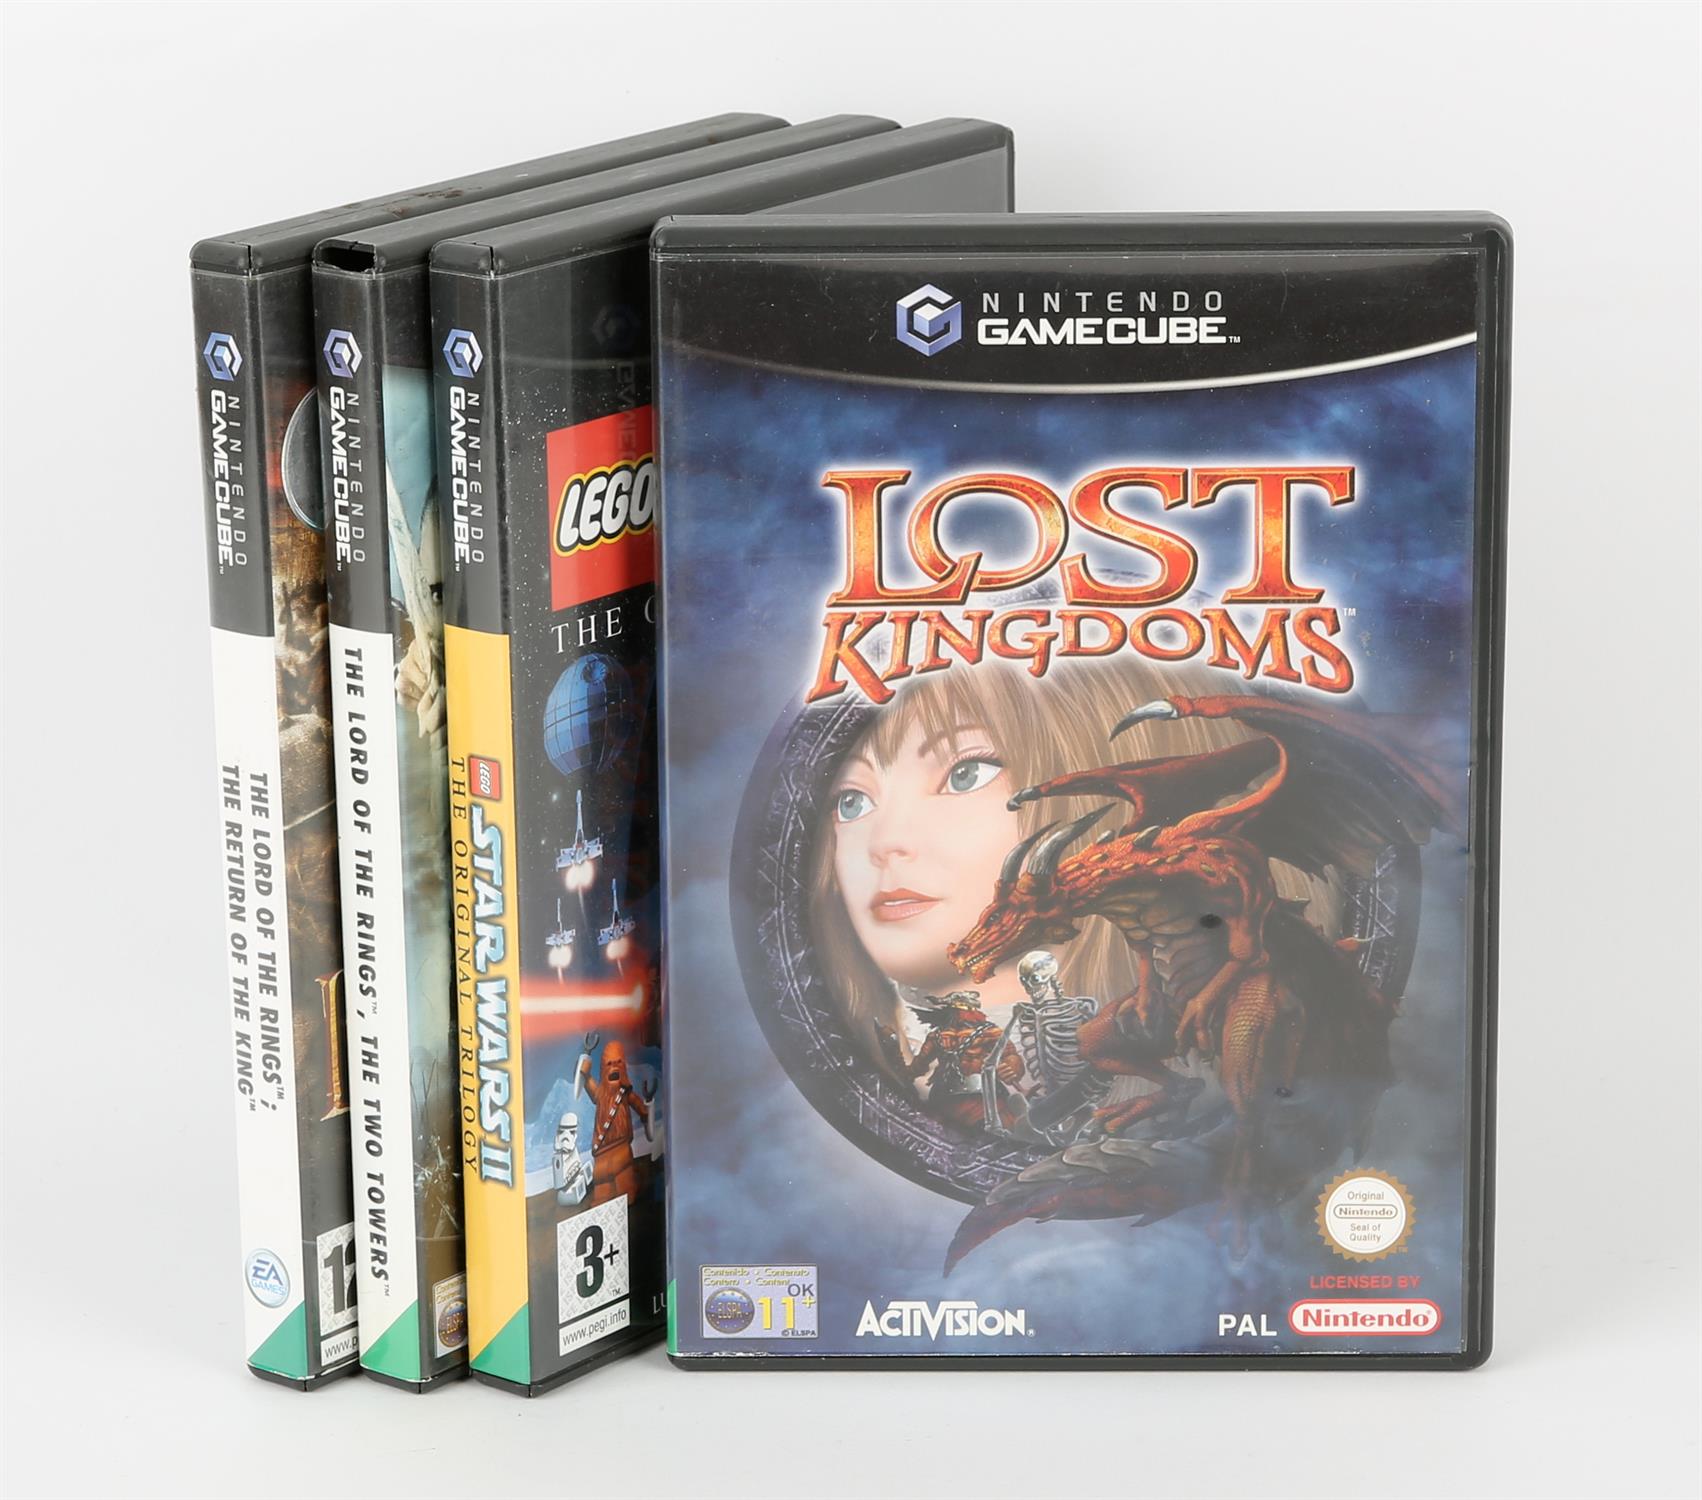 Nintendo GameCube Fantasy/Movie Tie-In bundle (PAL) Games include: The Lord of the Rings: The Two